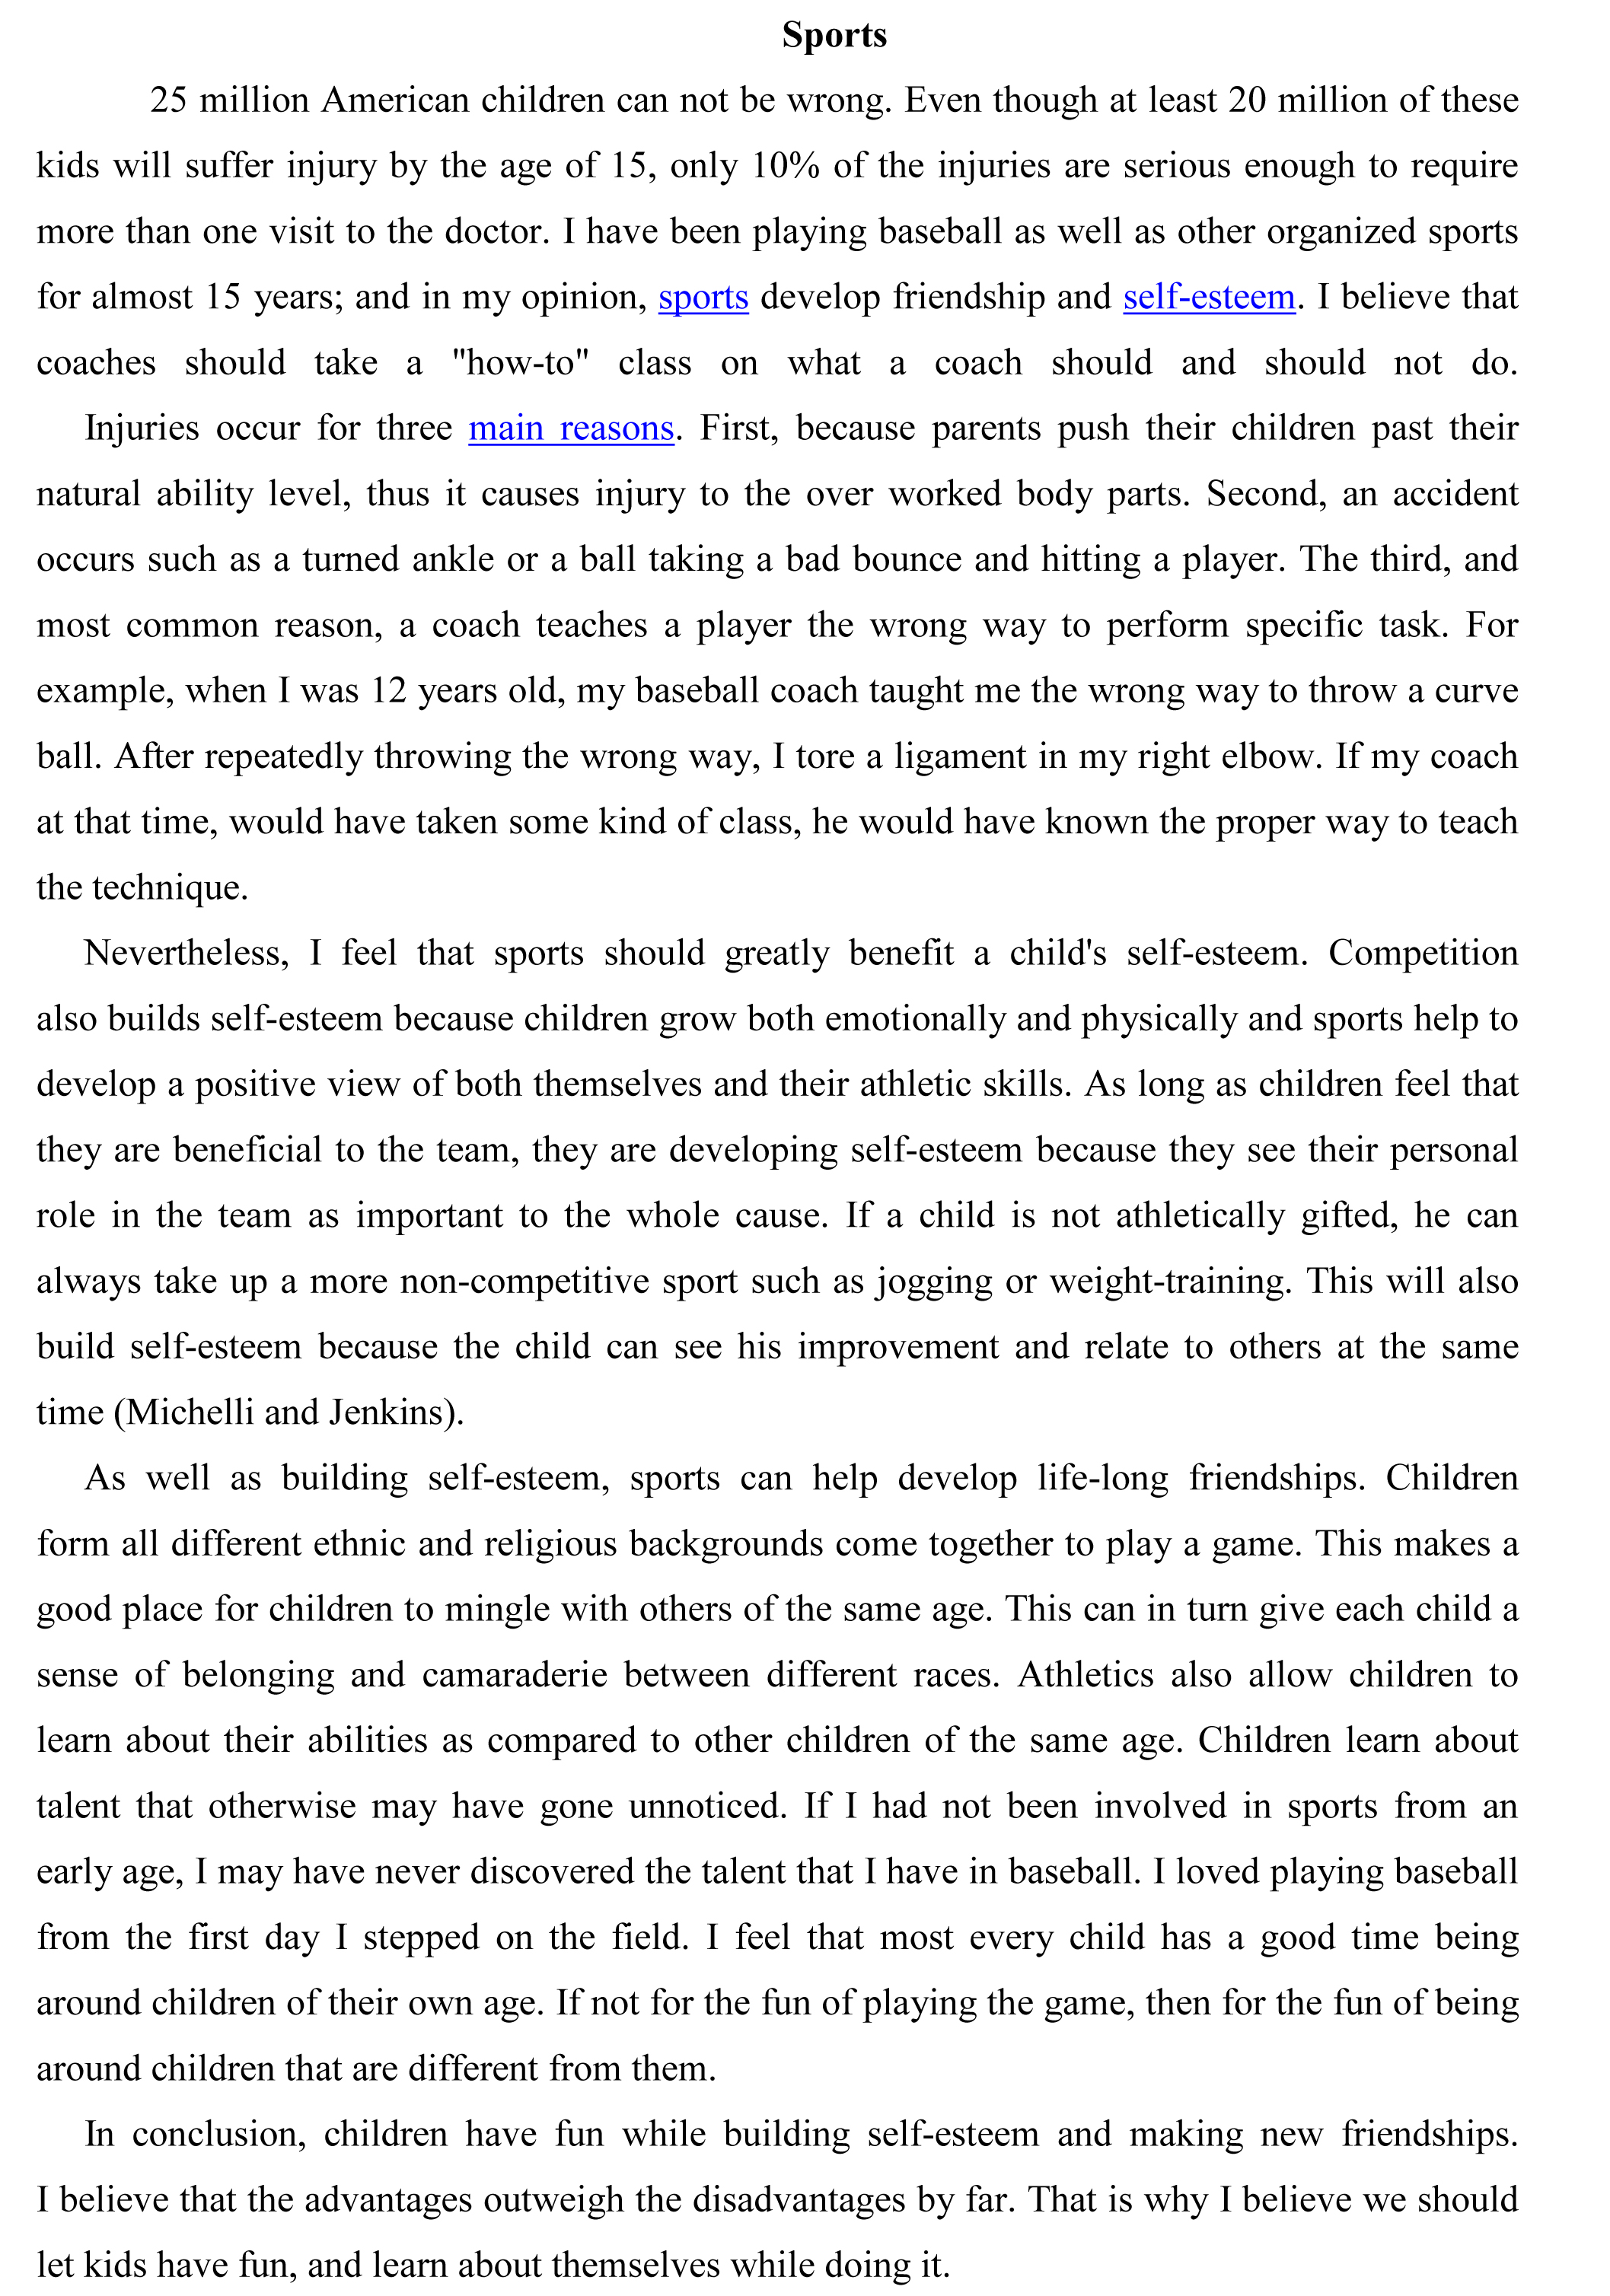 Essay About Sports Importance for Youth - , , Words Example